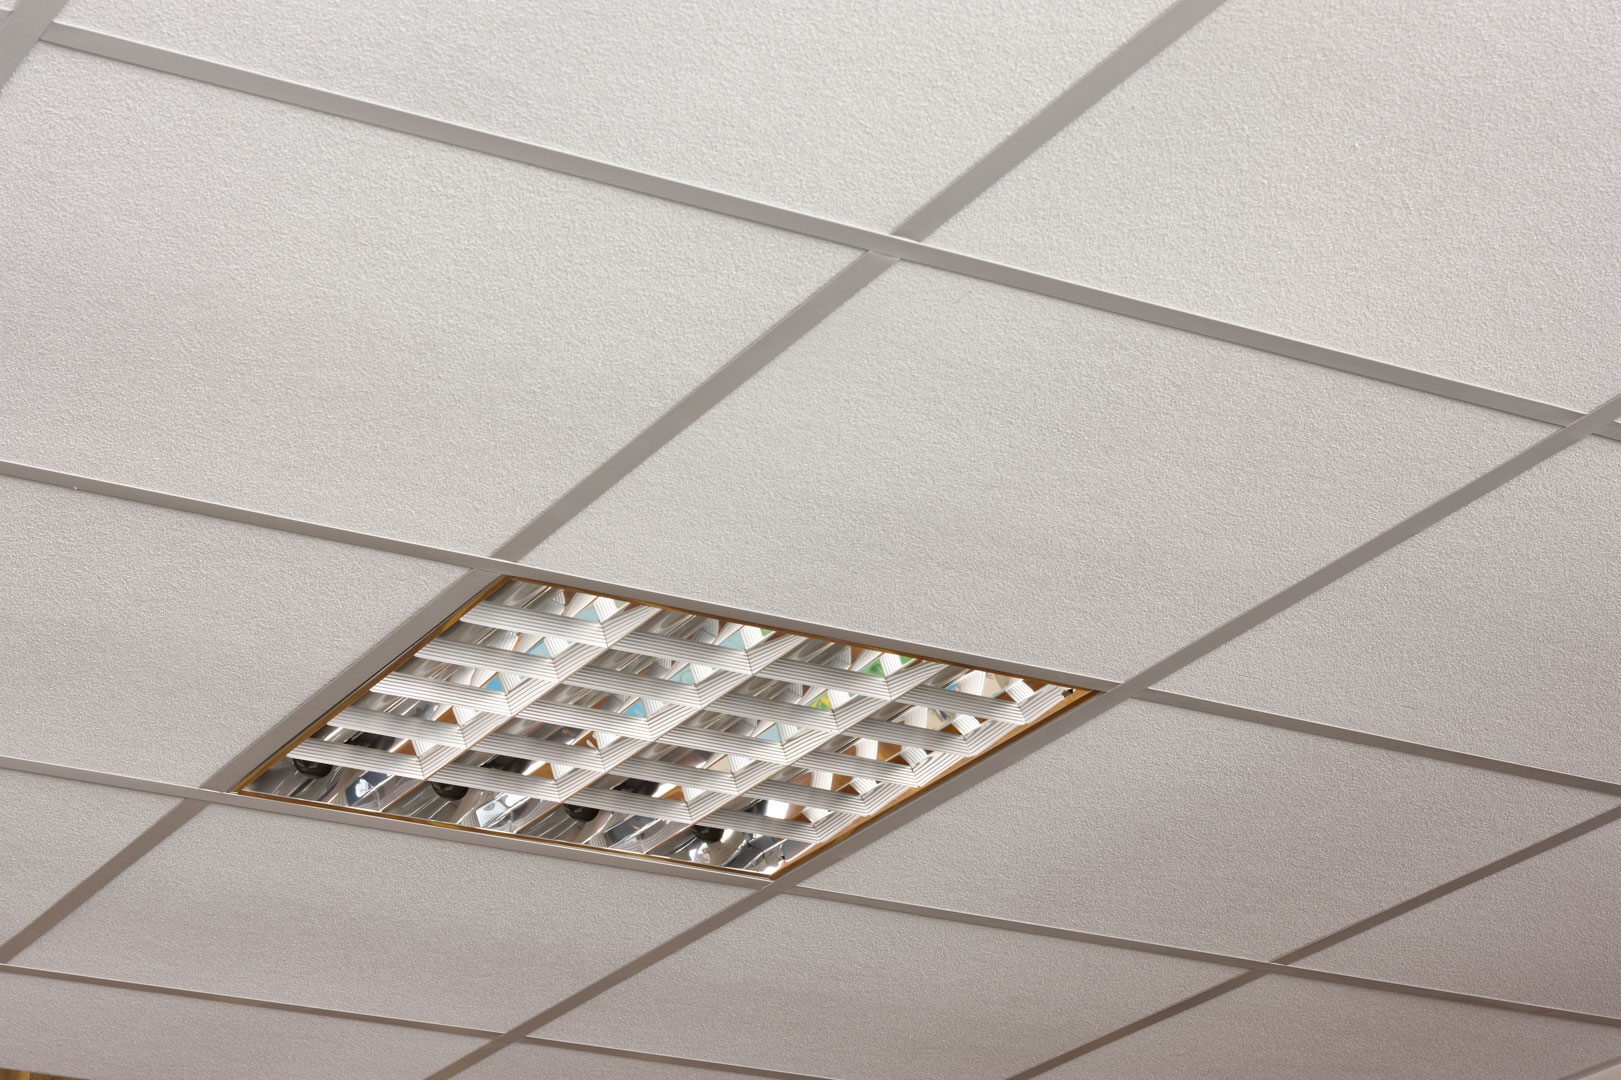 Armstrong Ceiling Tile Retailers Armstrong Ceiling Tile Retailers ceiling tiles lights accessories a leading uk supplier of 1621 X 1080